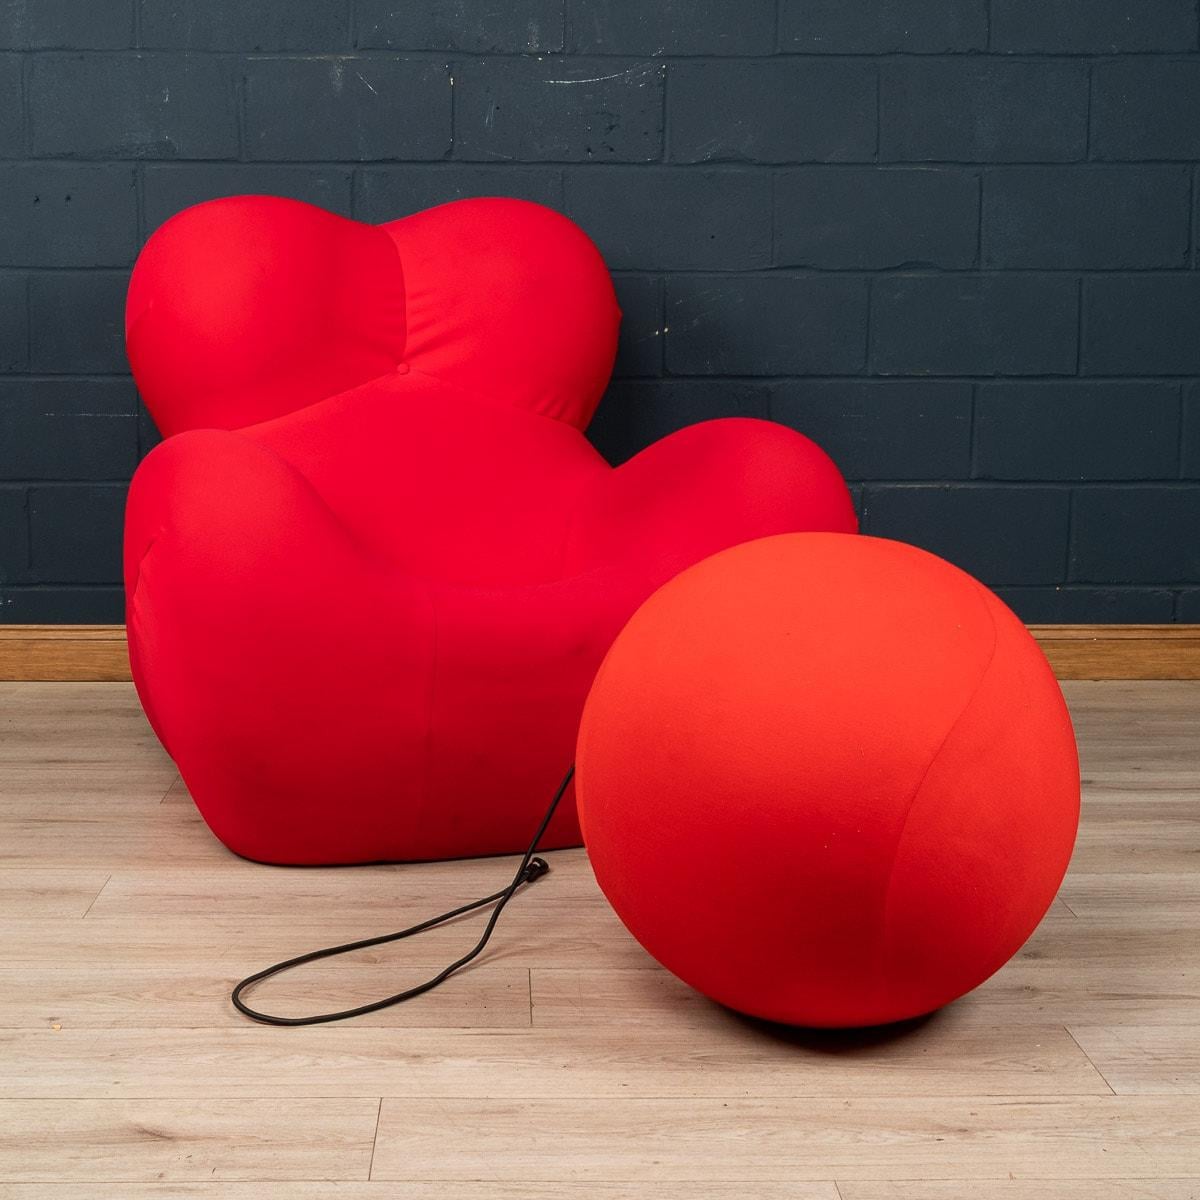 It was 1968 when Gaetano Pesce began experimenting at his Paris atelier with vacuum-packing the hippest material of the moment: polyurethane. Soon he’d developed a gravity-defying model: a four-inch-thick disk that, when removed from its PVC